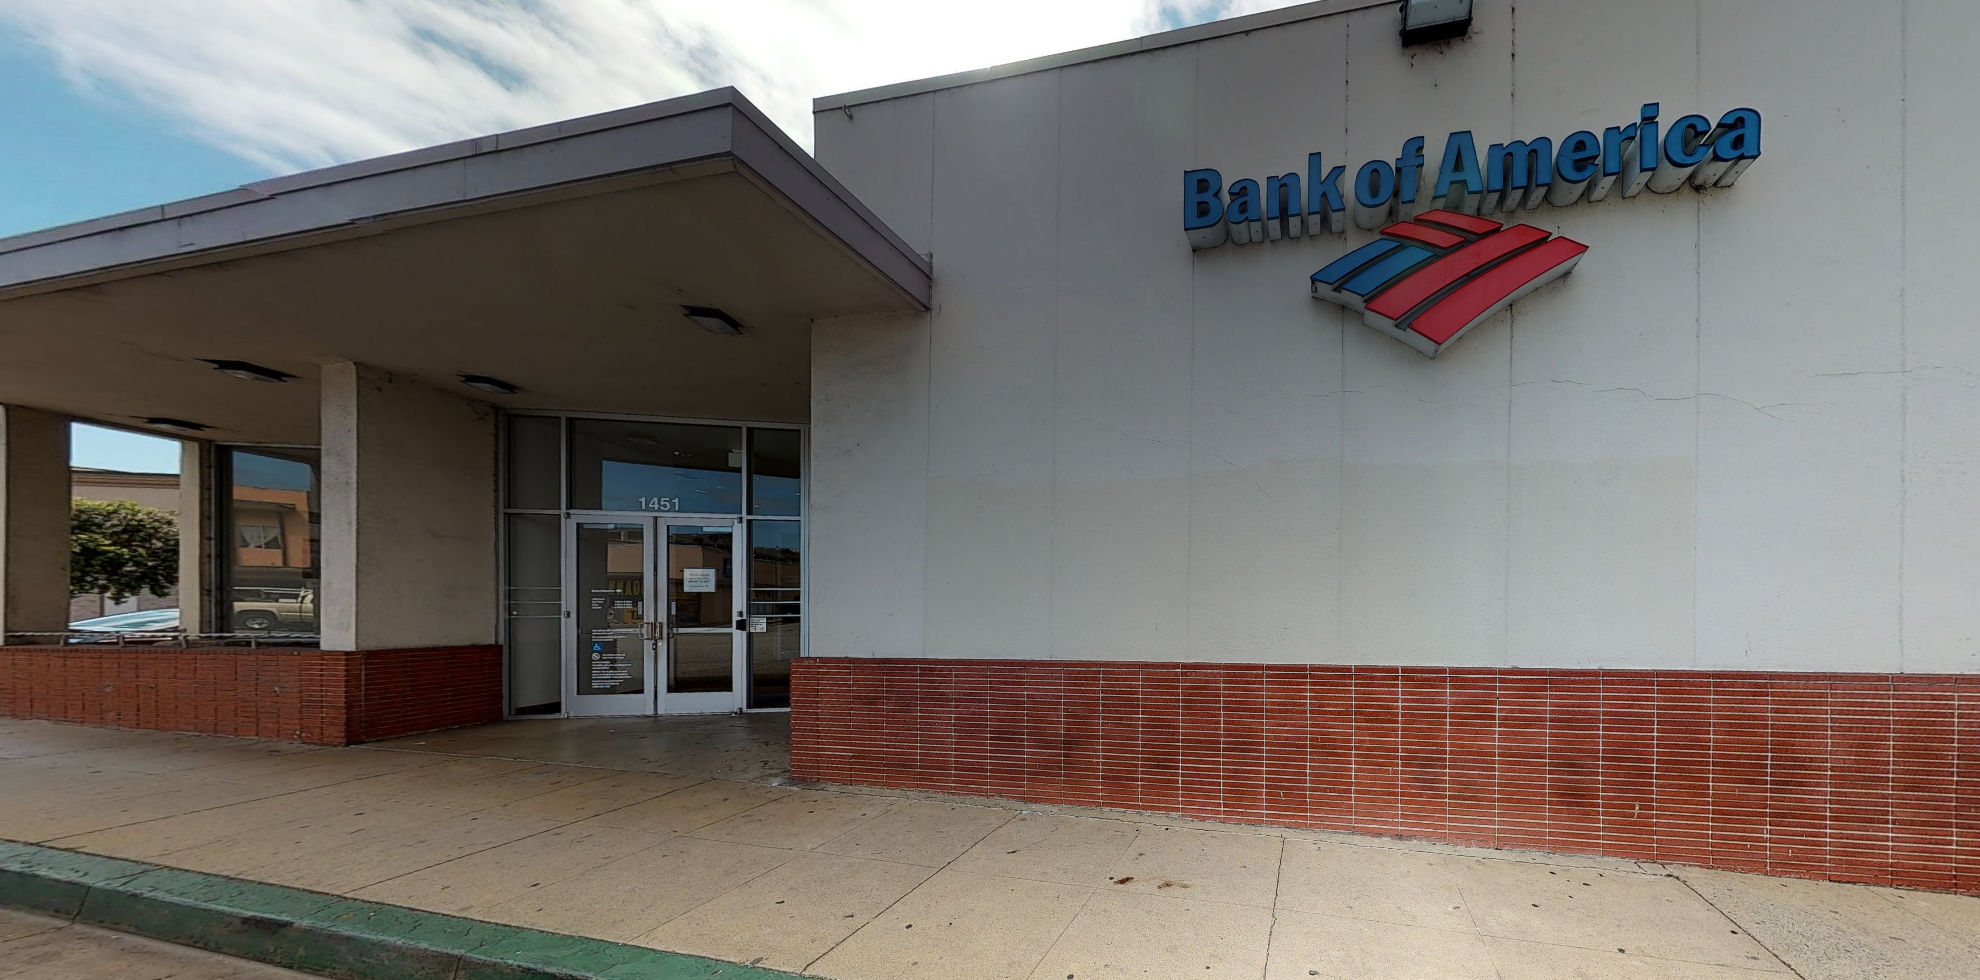 Bank of America financial center with drive-thru ATM | 1451 Fremont Blvd, Seaside, CA 93955